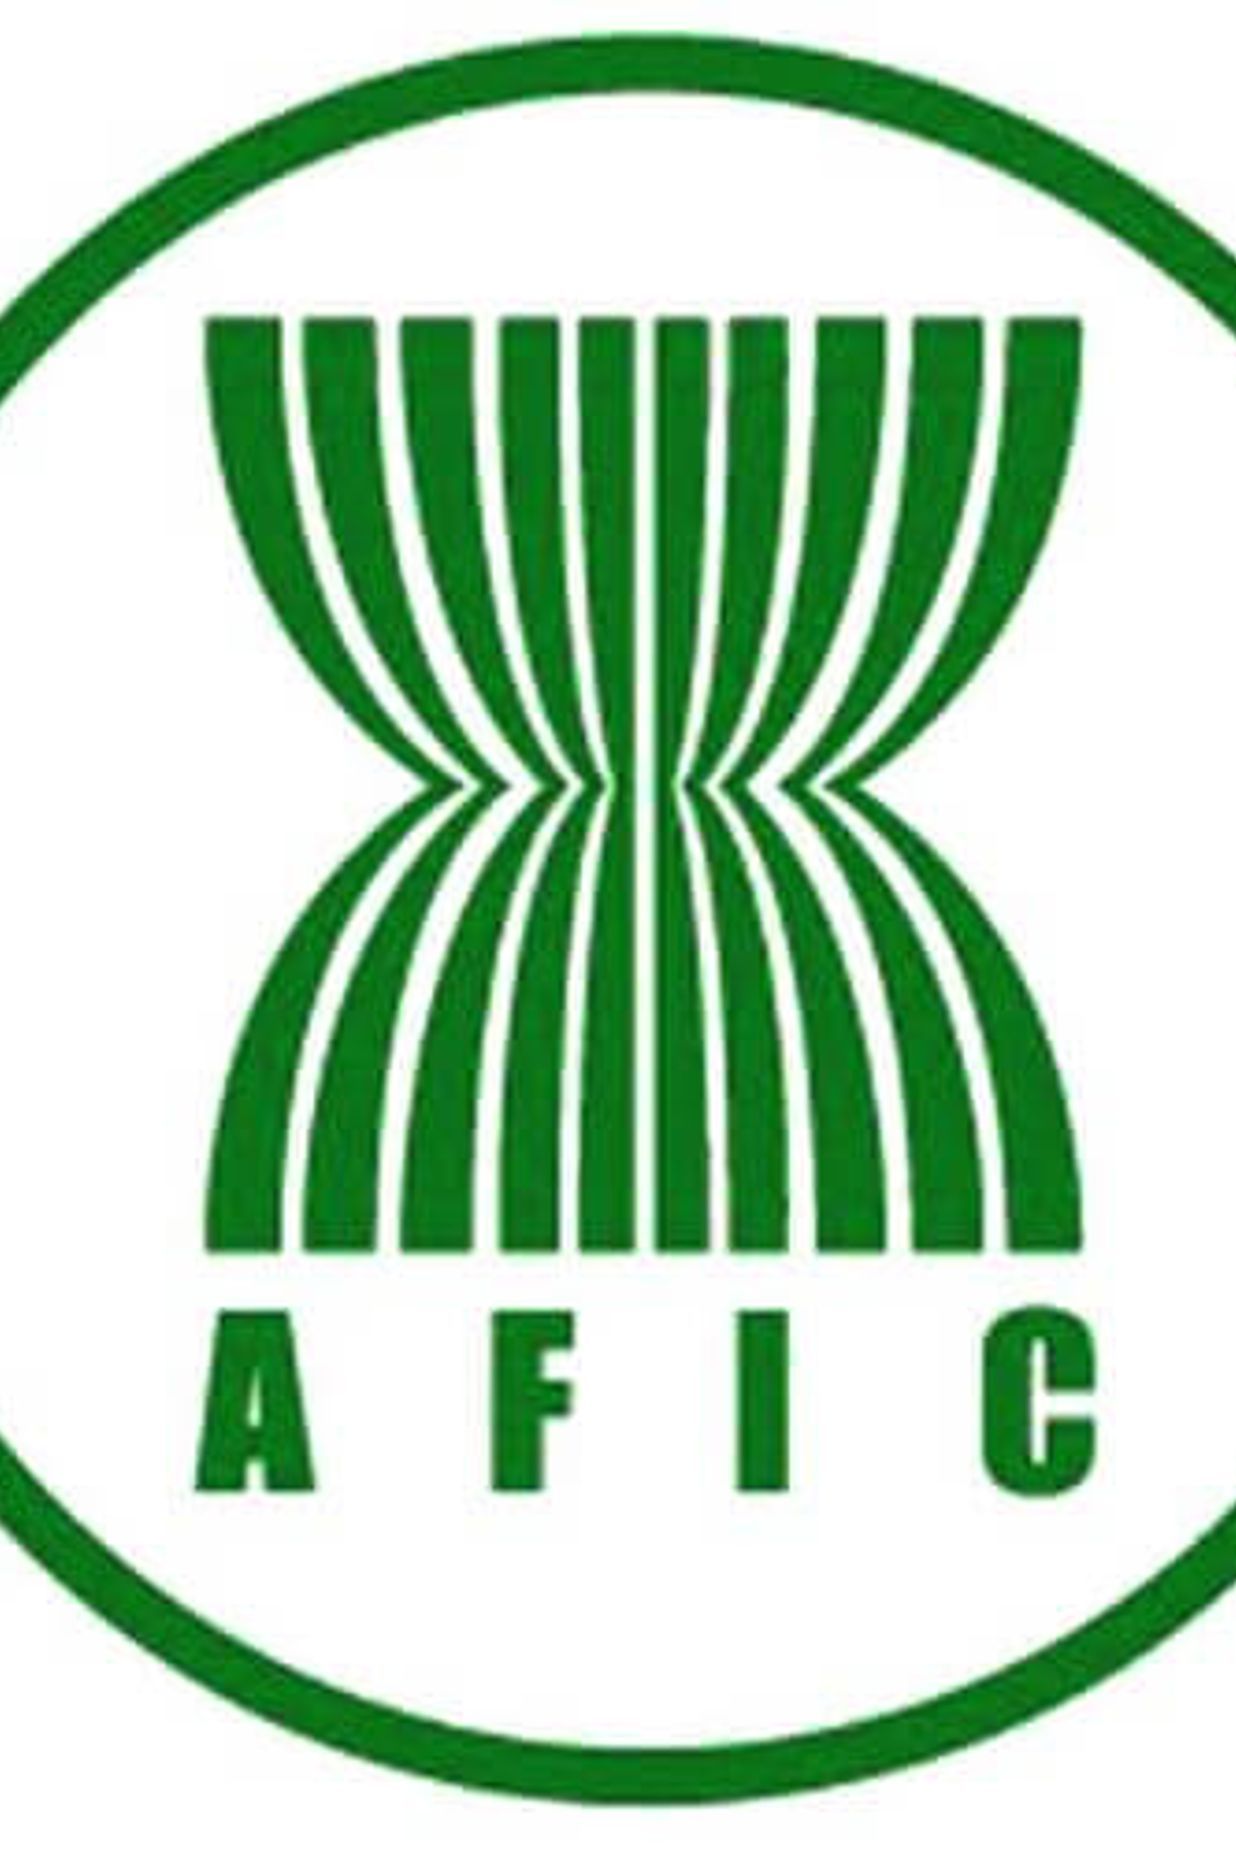 AFIC and PEFC create a sustainability roadmap for a sustainable furniture supply chain